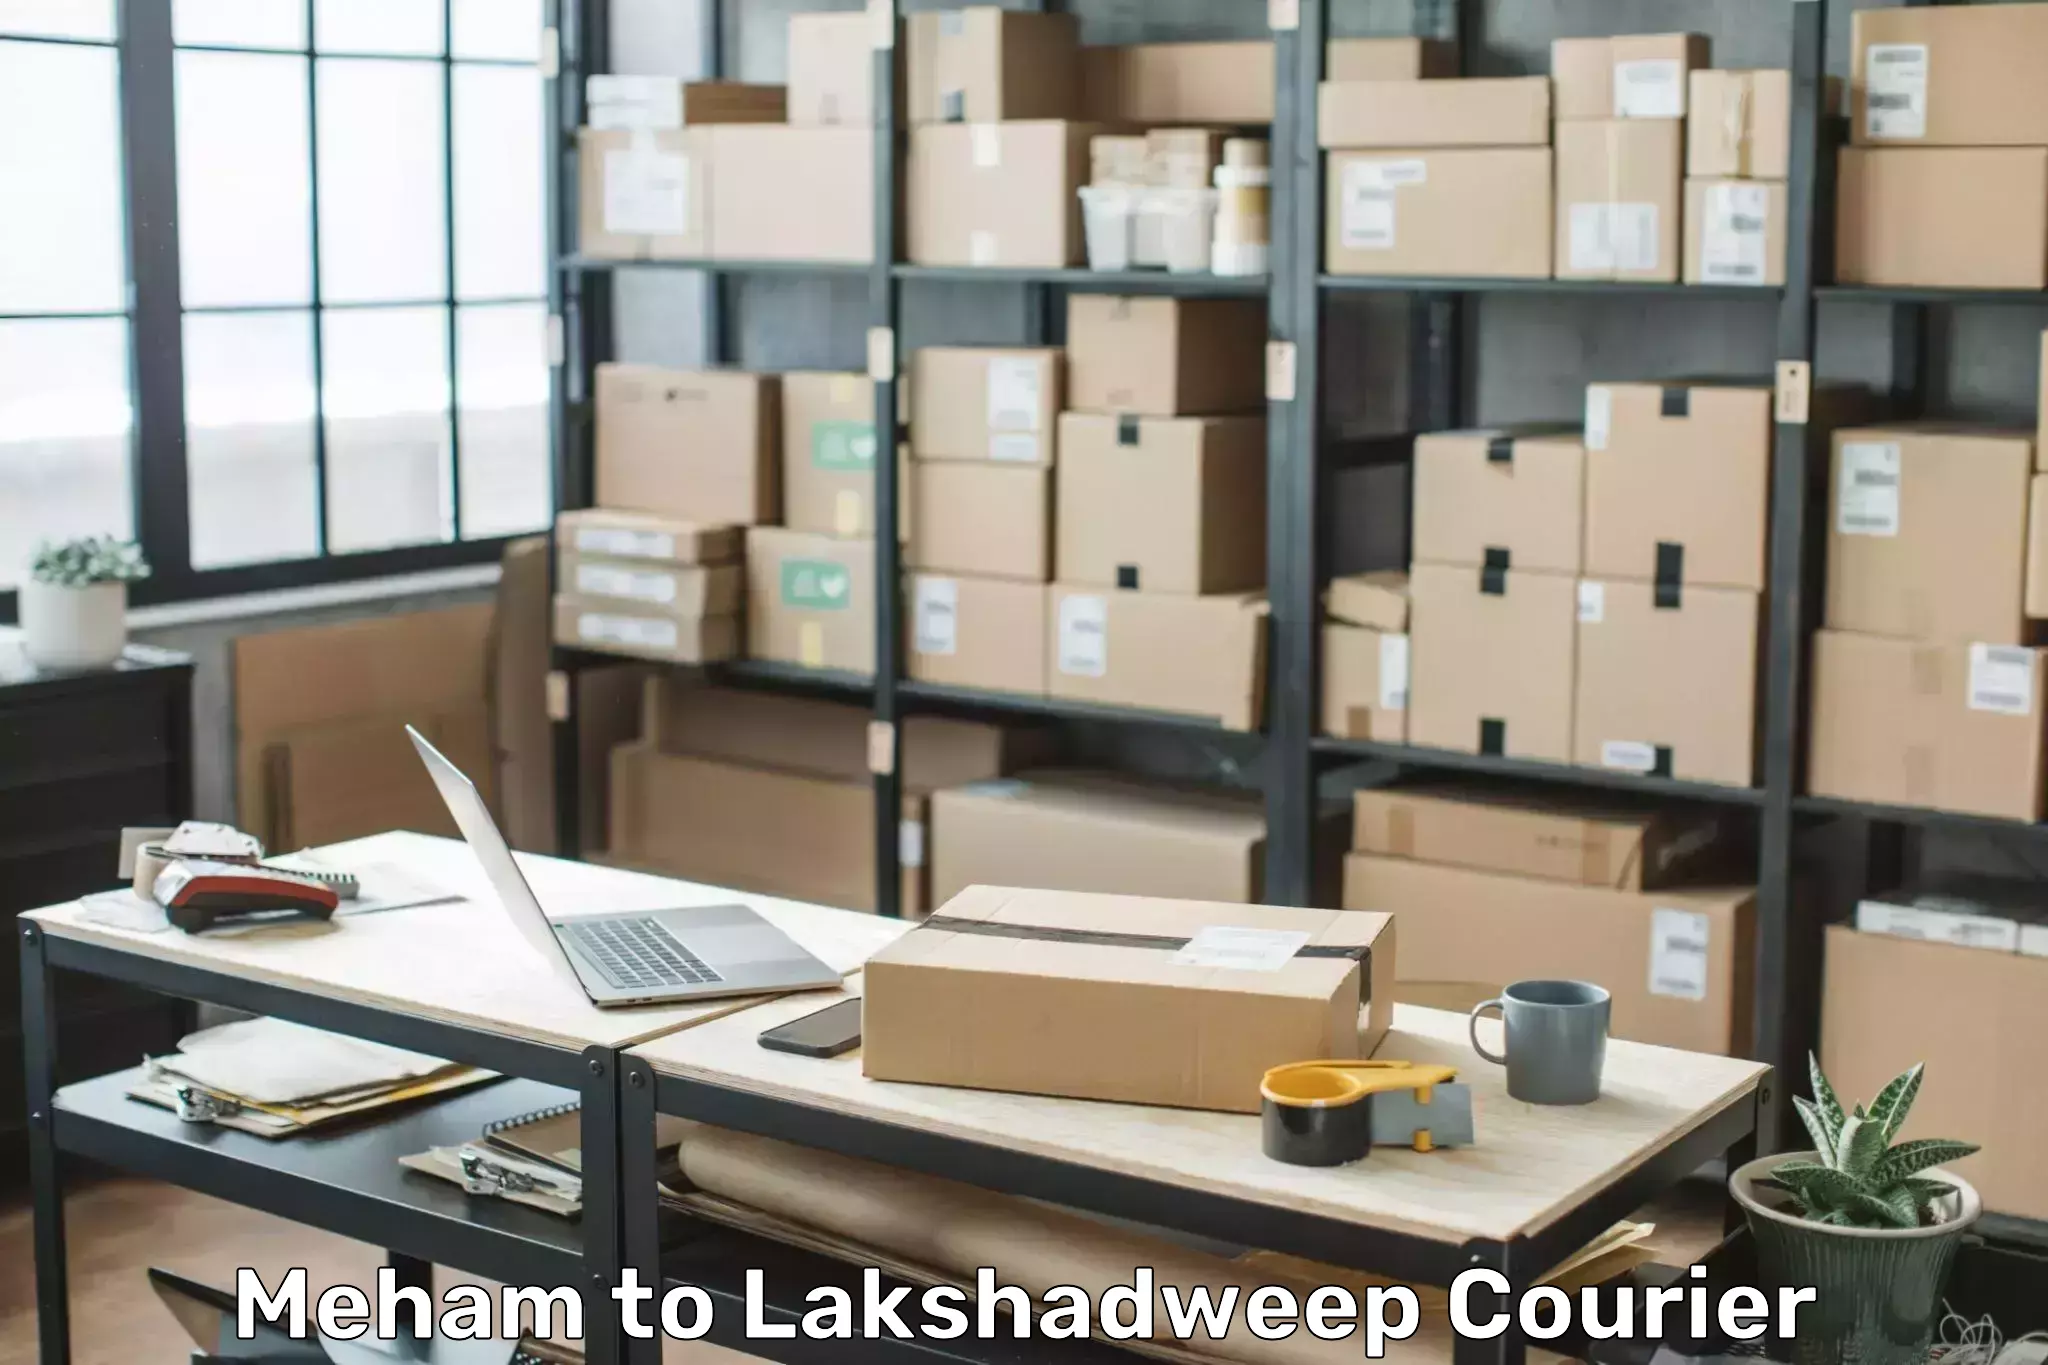 Hassle-free luggage shipping in Meham to Lakshadweep